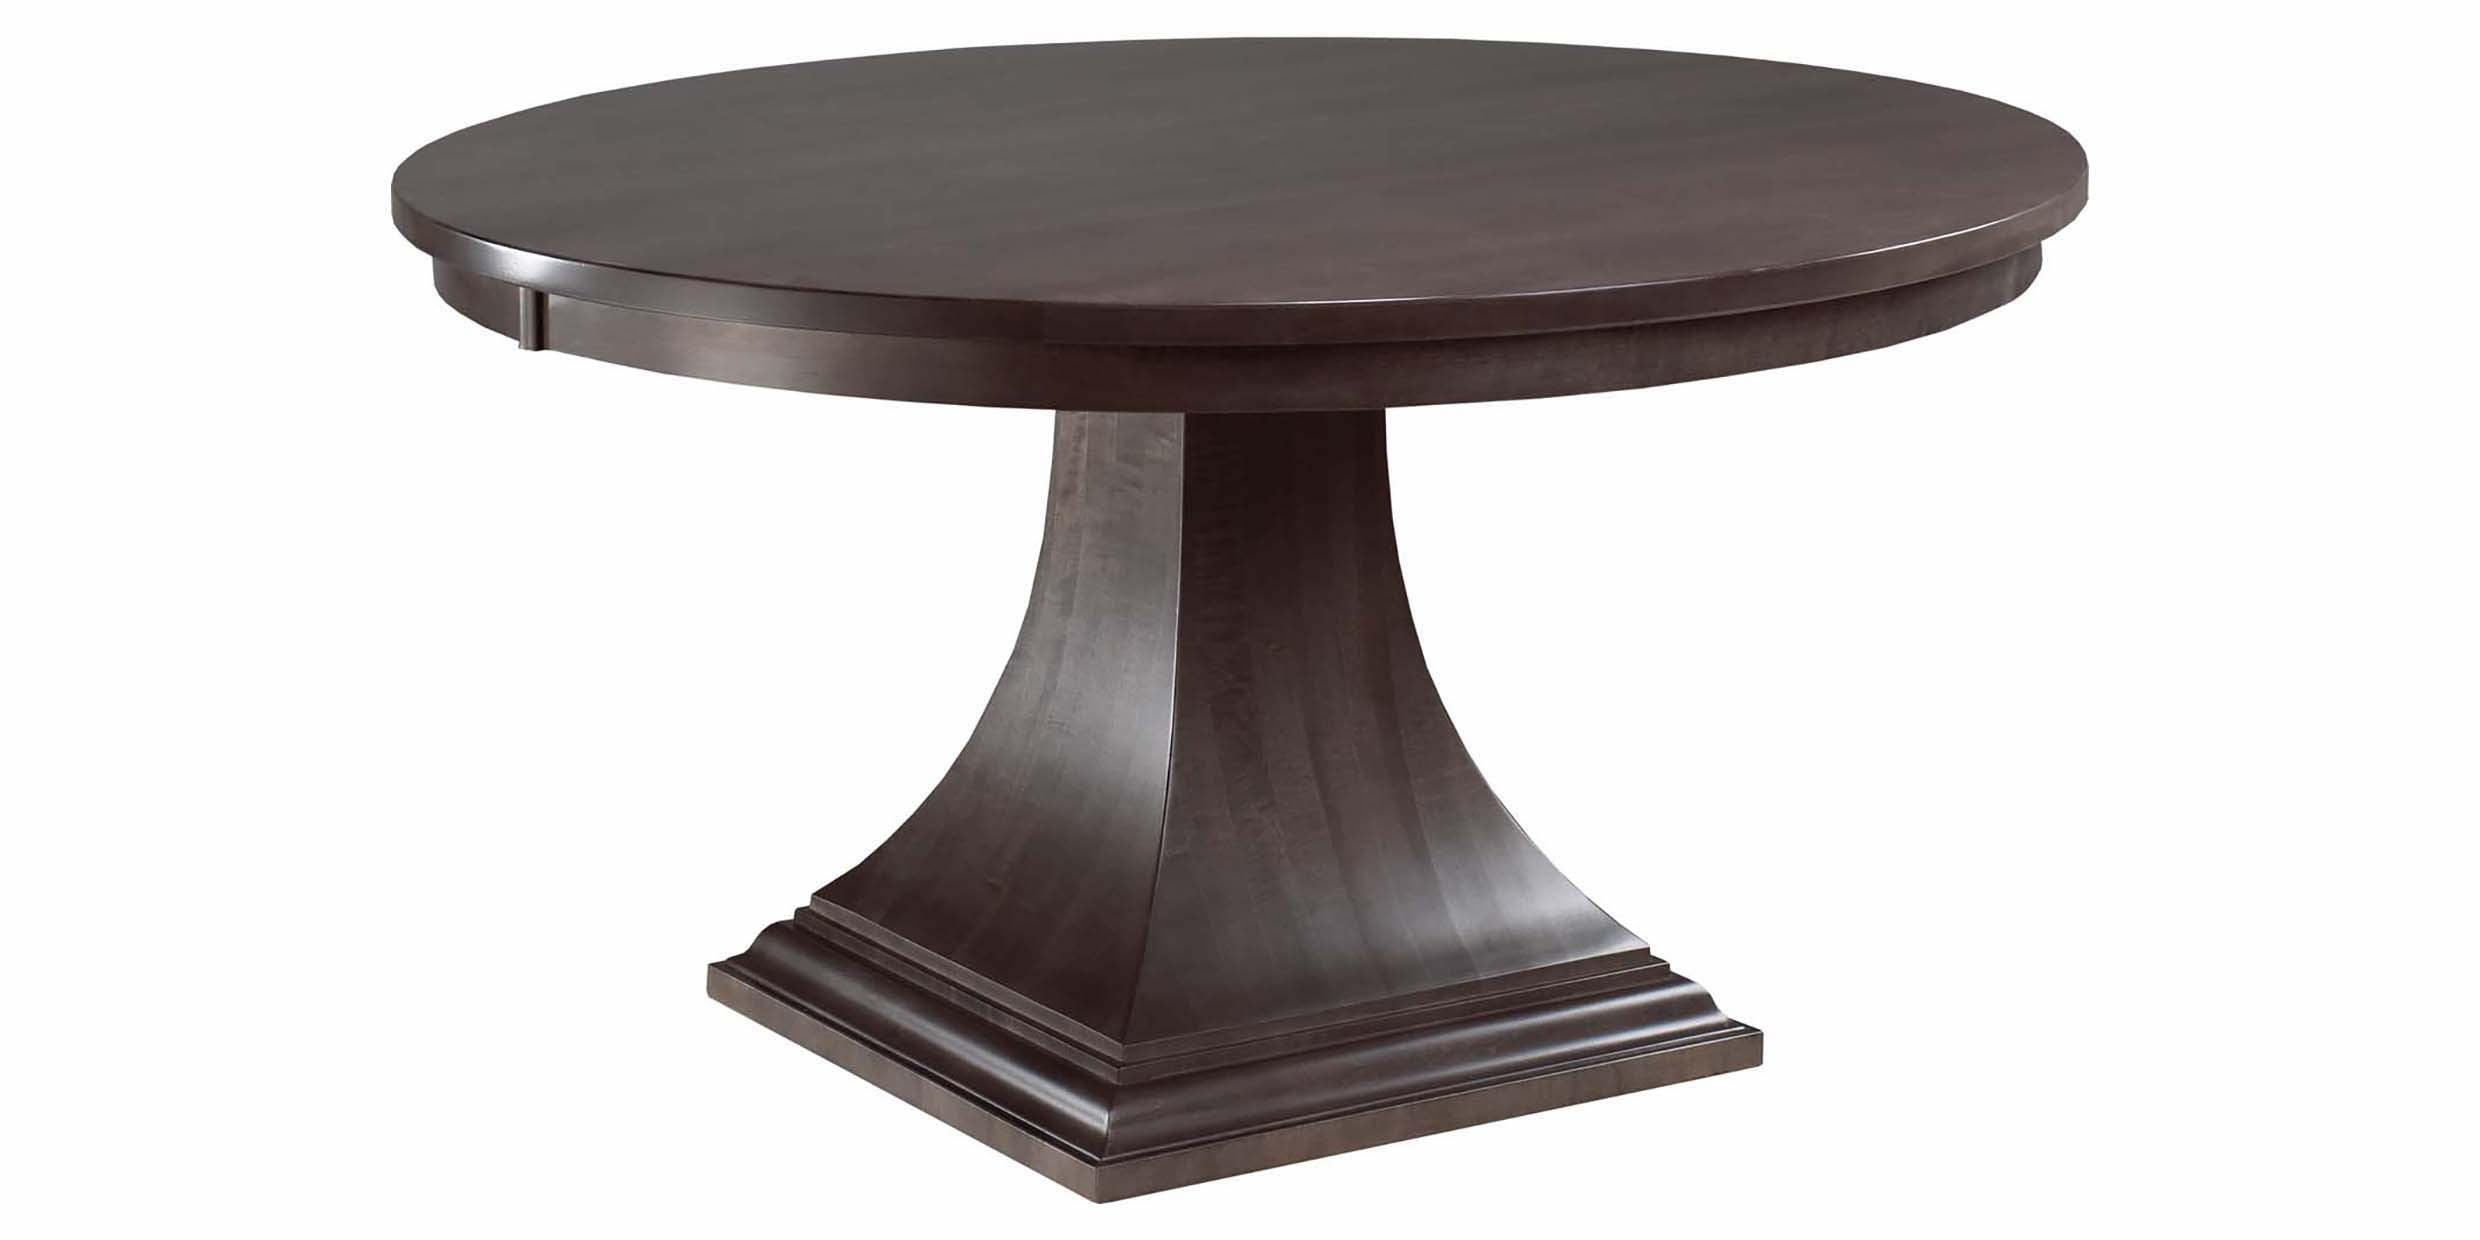 Table as Shown | Cardinal Woodcraft Key West Dining Table | Valley Ridge Furniture